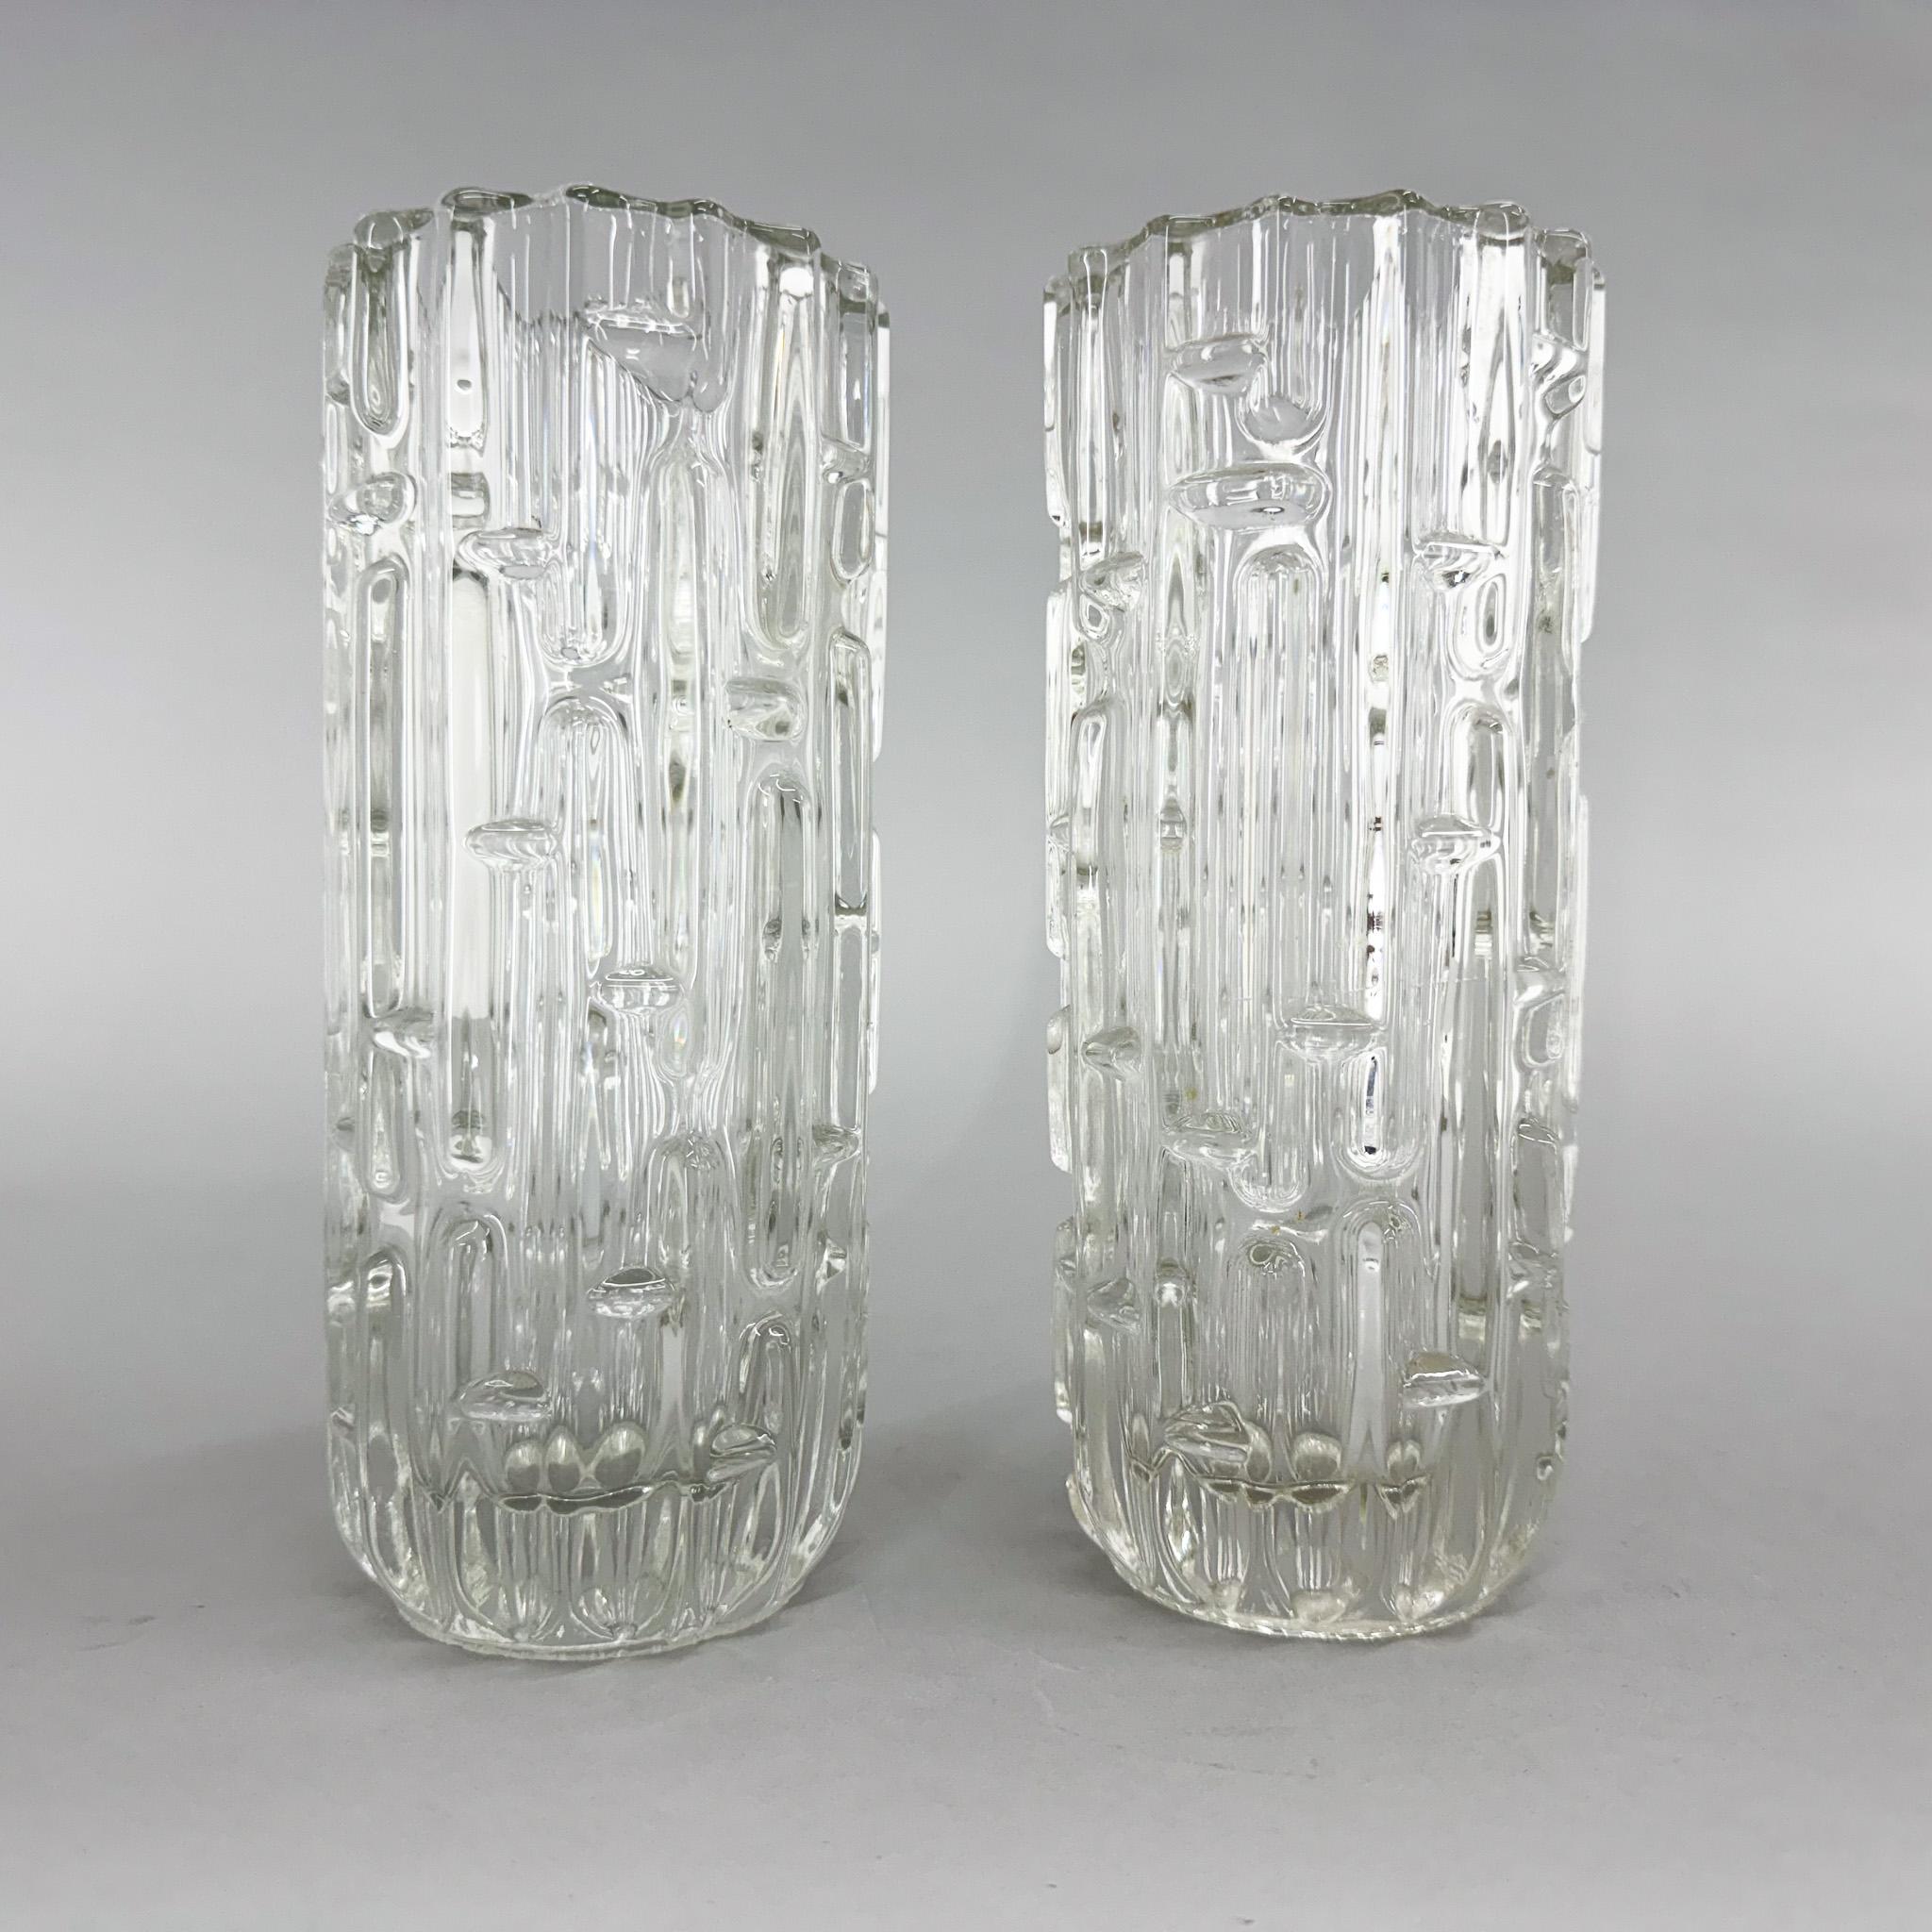 The vase is made of densely pressed clear glass.
The vase has several protrusions that evoke a maze.
According to this decoration, the vases are named Maze.
The vasew were designed by František Vízner (1936 - 2011) in the second half of the 20th